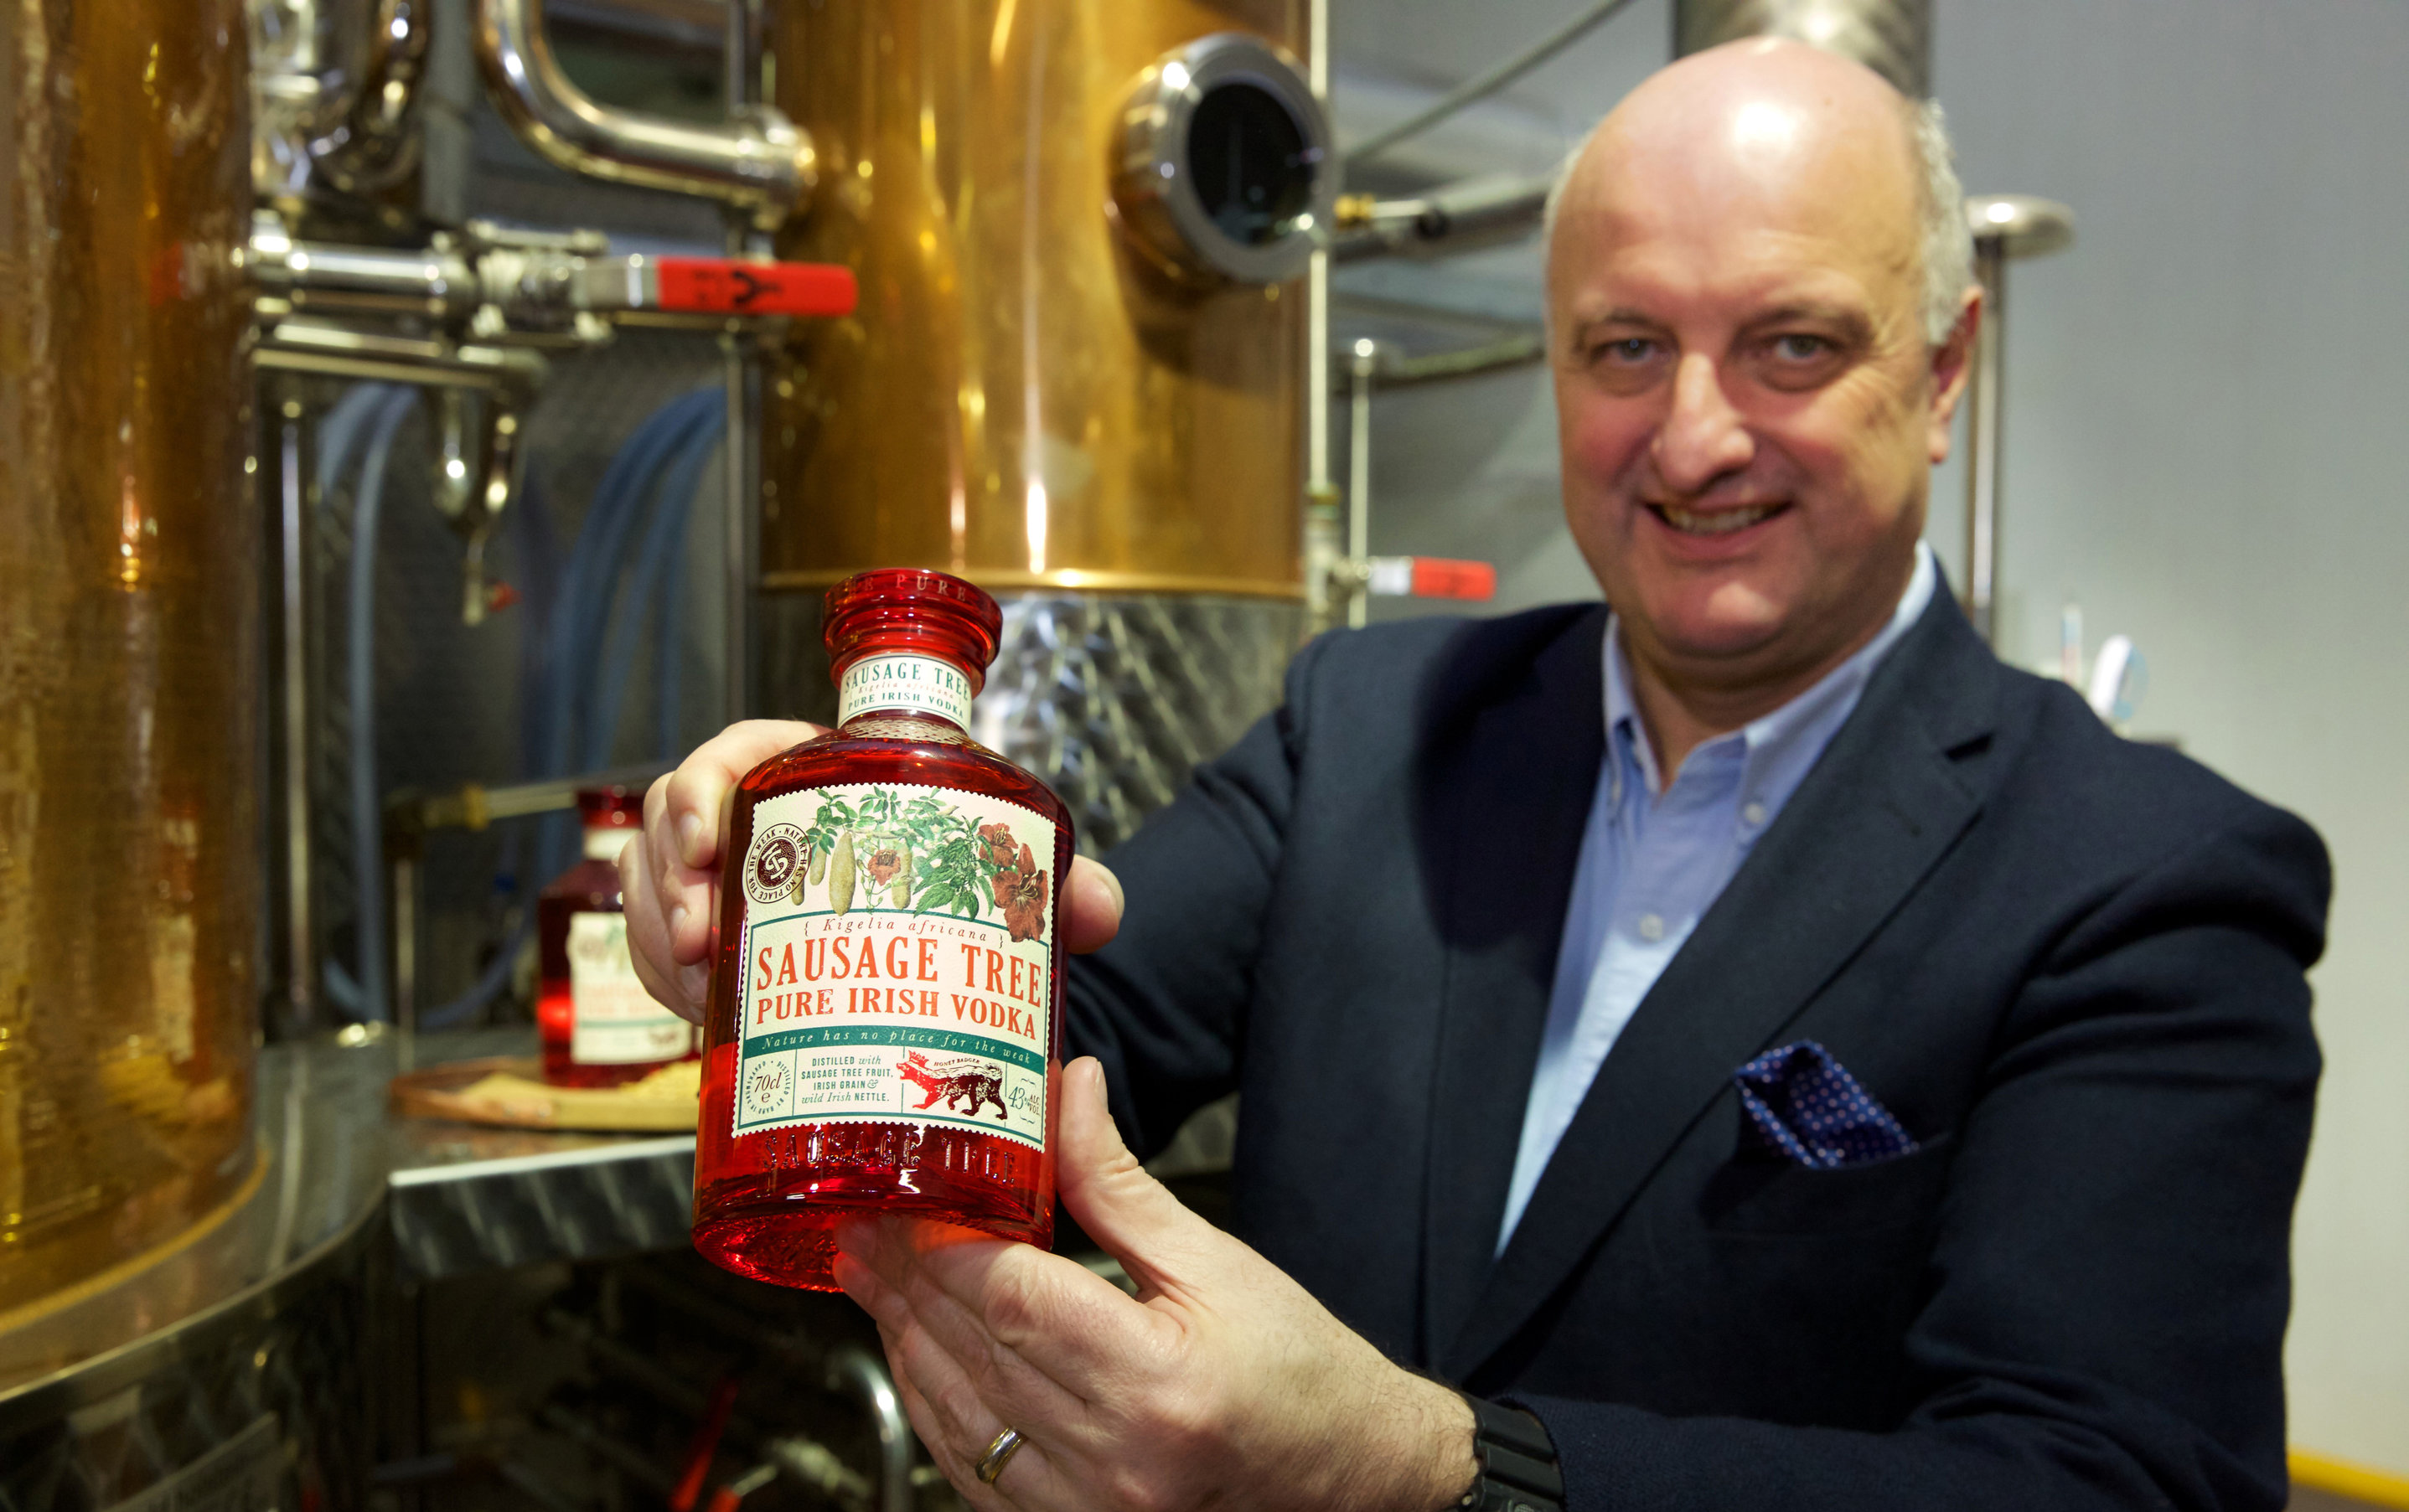 PJ Rigney’s Shed Distillery makes Drumshanbo Gunpowder Gin and recently launched Sausage Tree Vodka.